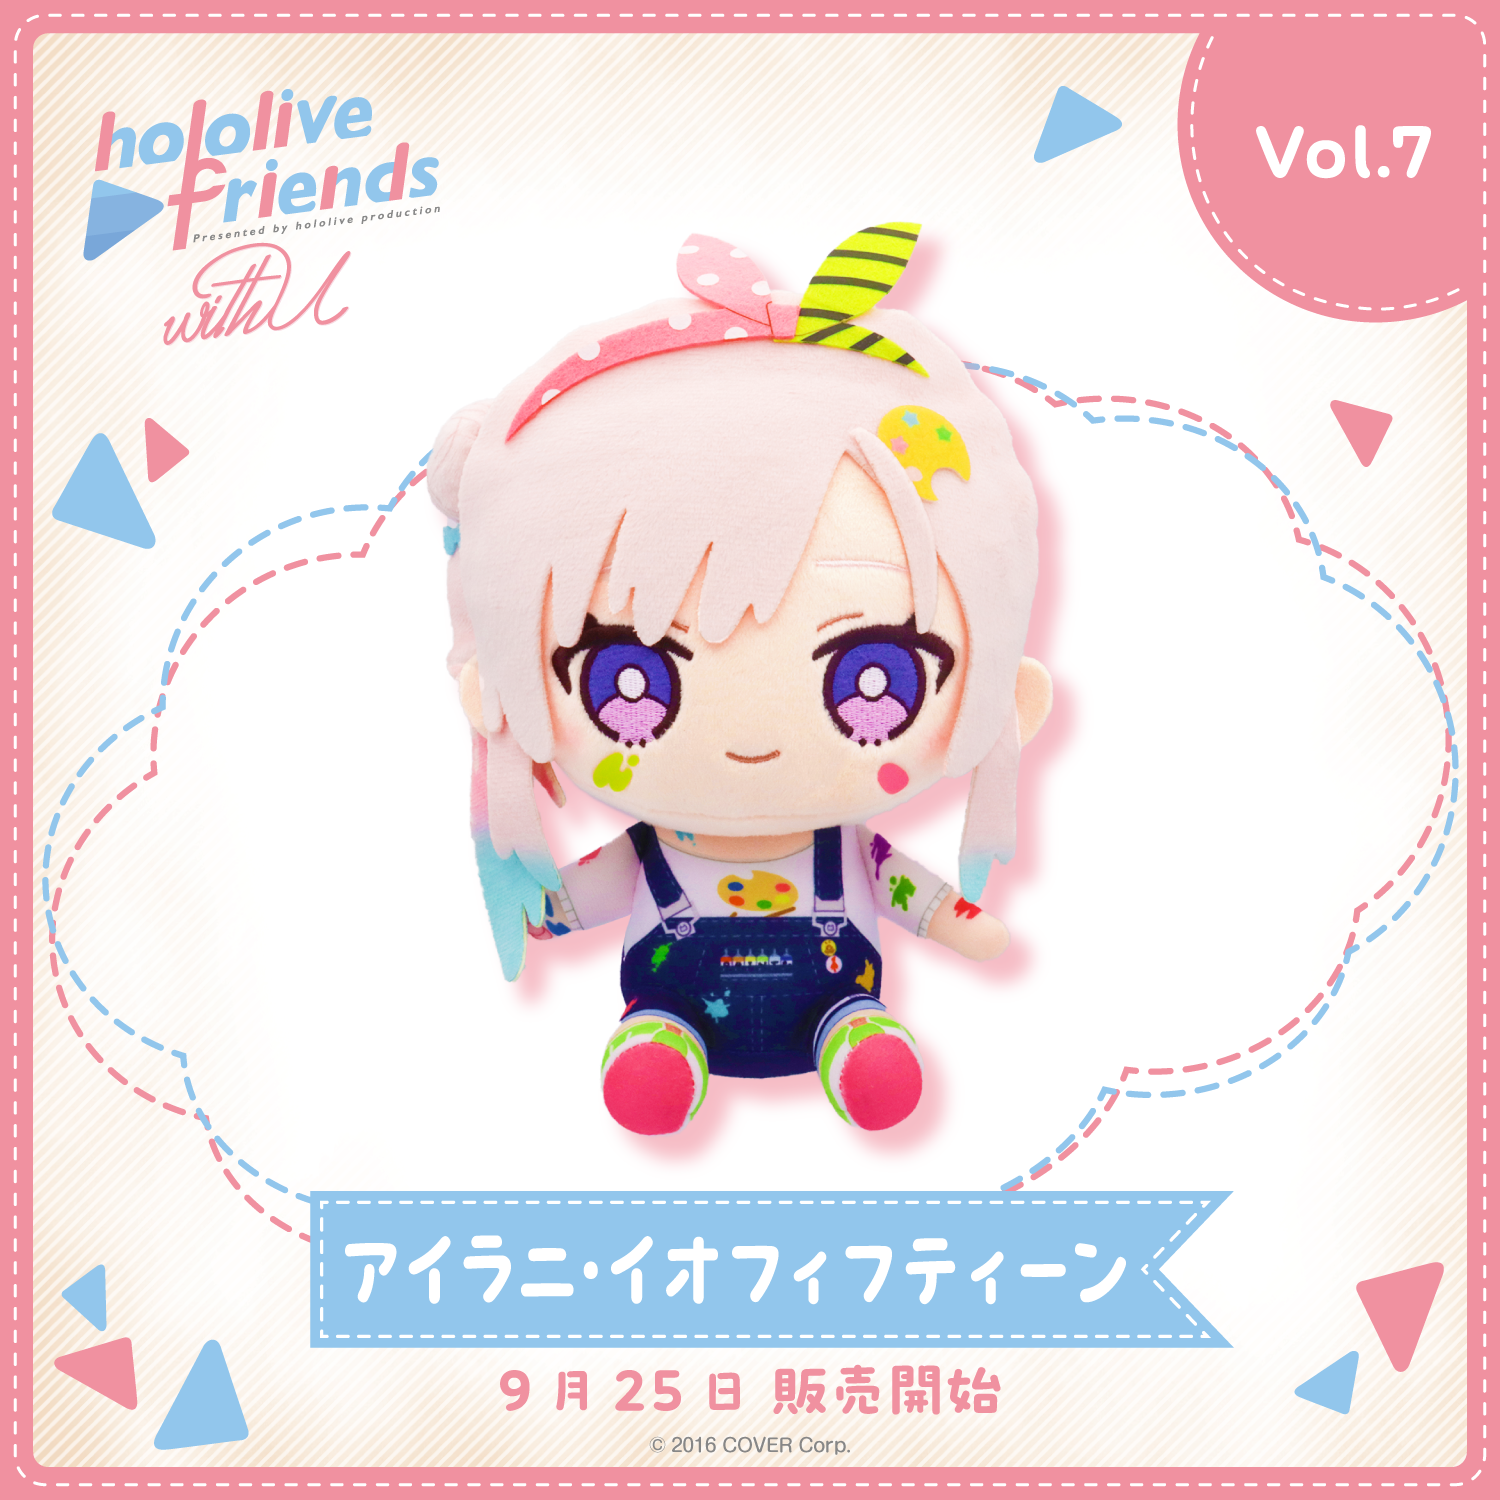 hololive friends with u アイラニ・イオフィフティーン – hololive 